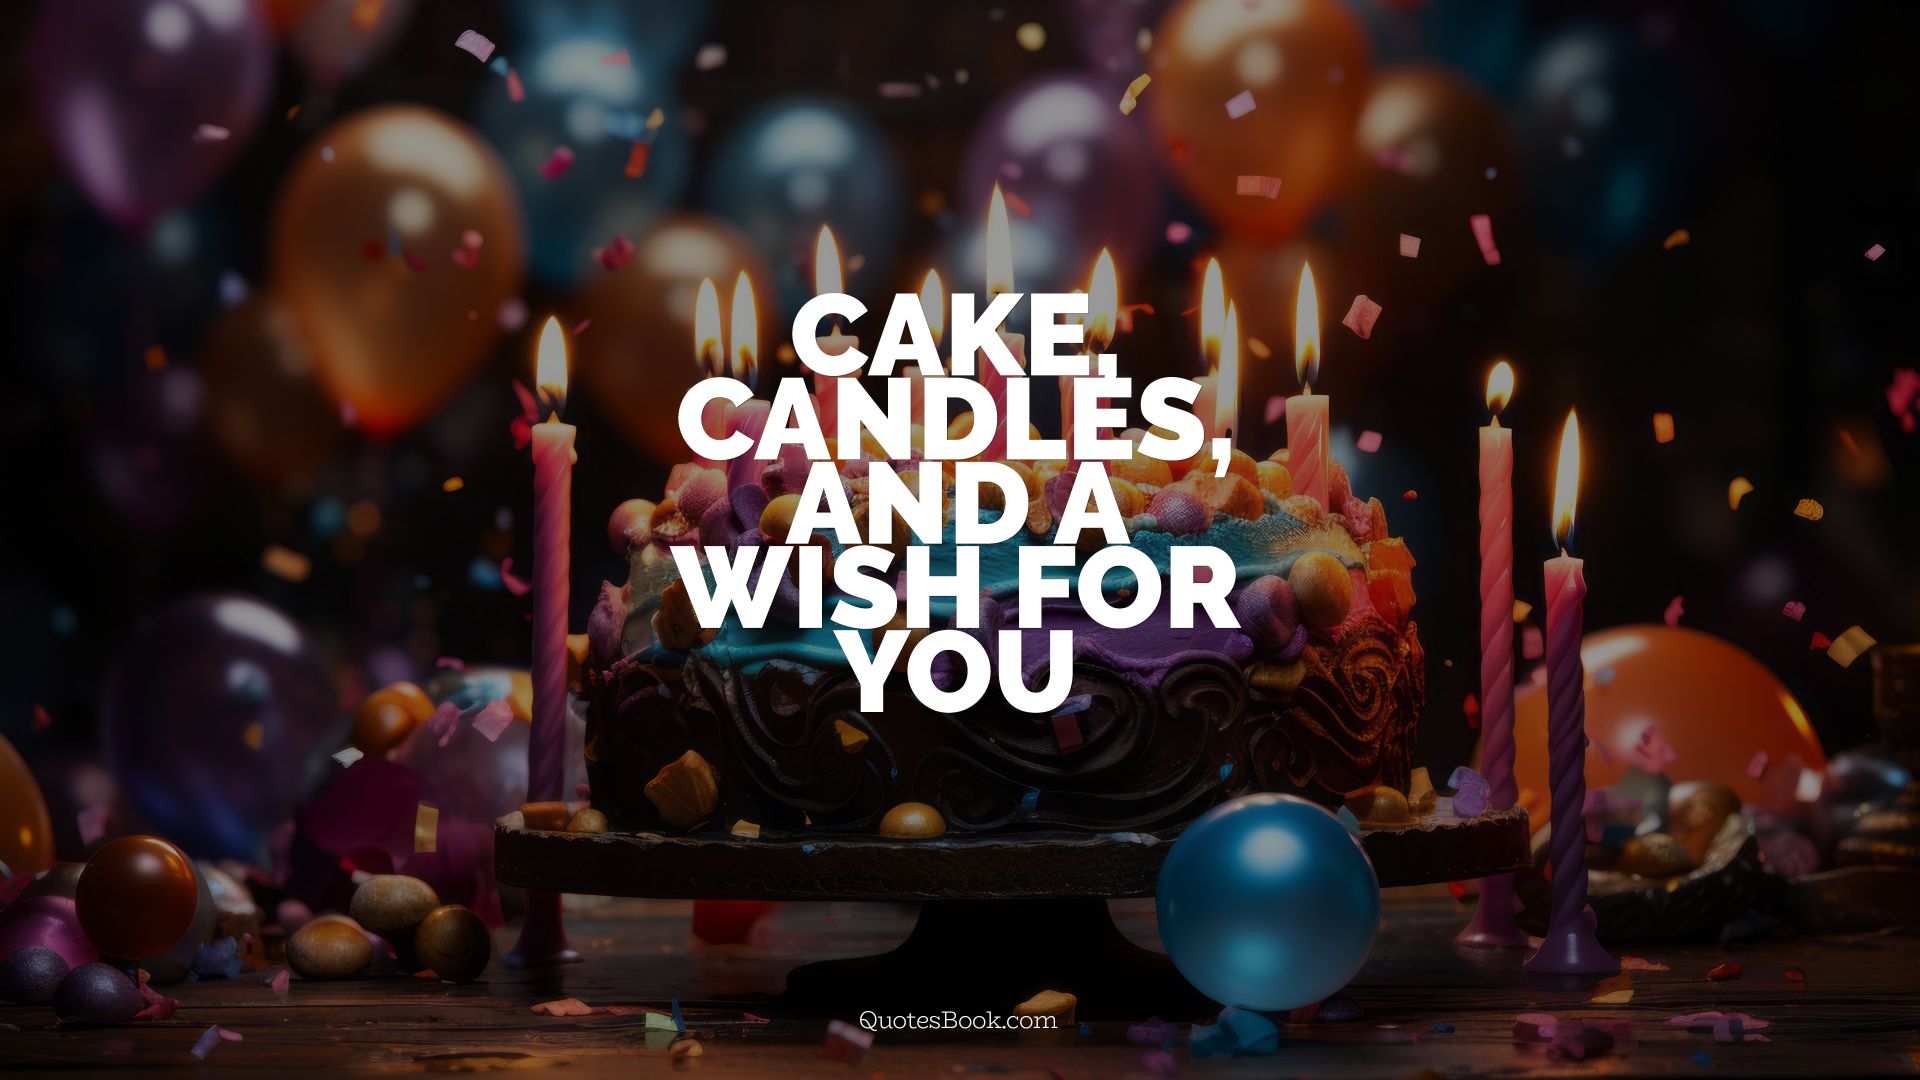 Cake, candles, and a wish for you!. - Quote by QuotesBook